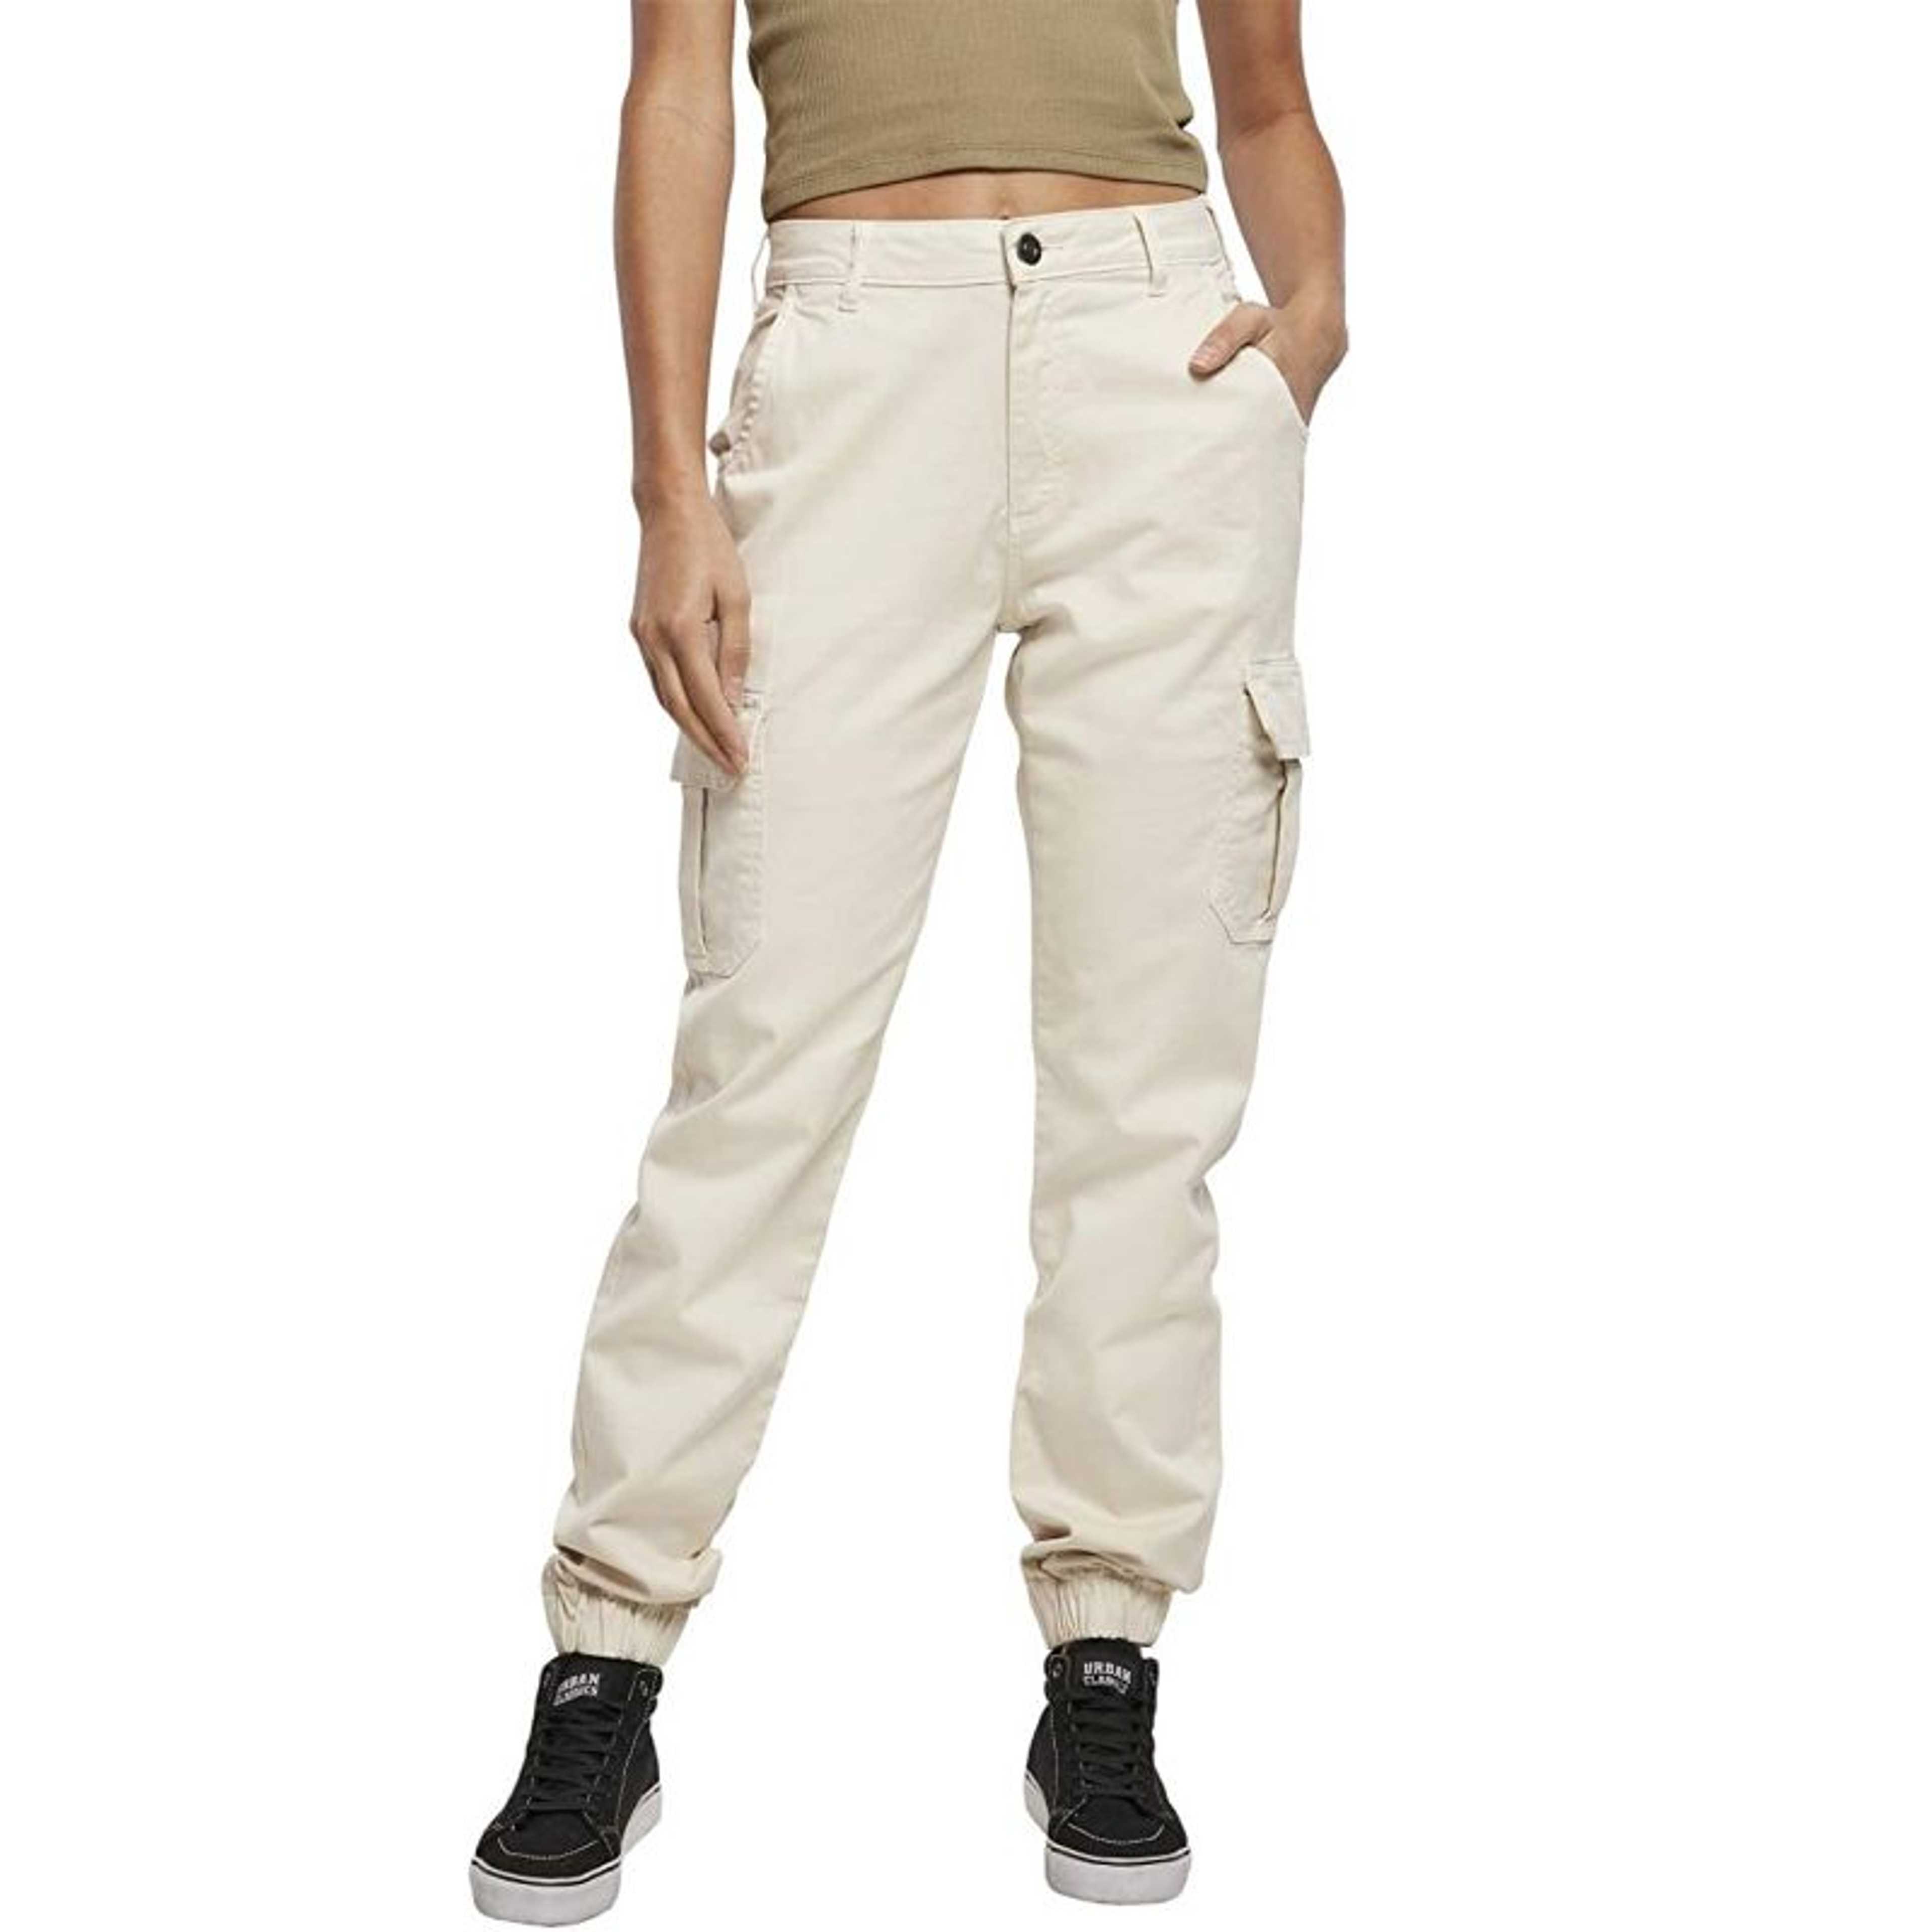 Off-White Rubahas Womens Cargo Trousers Ladies Trousers Jeans Pants